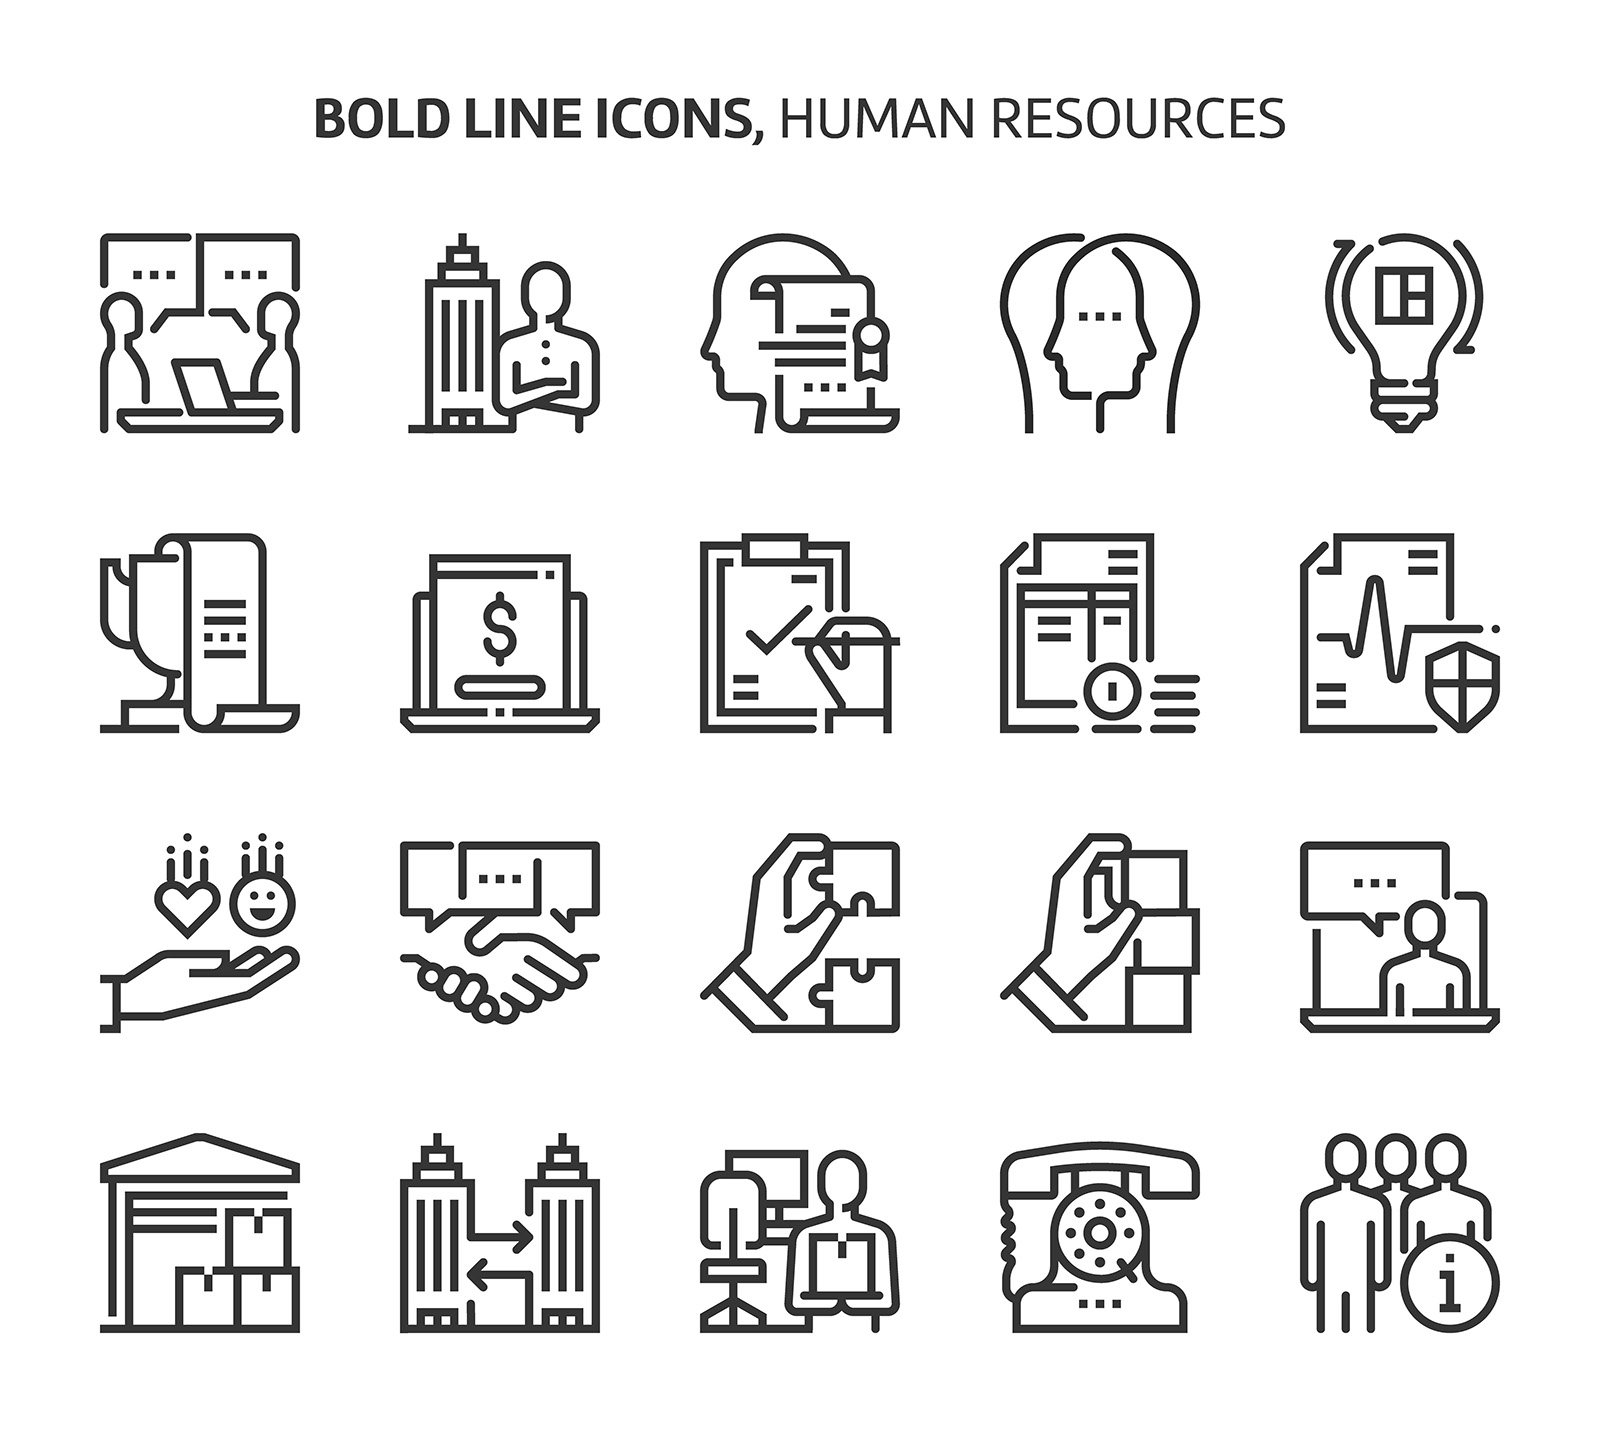 Human resources, bold line icons. cover image.